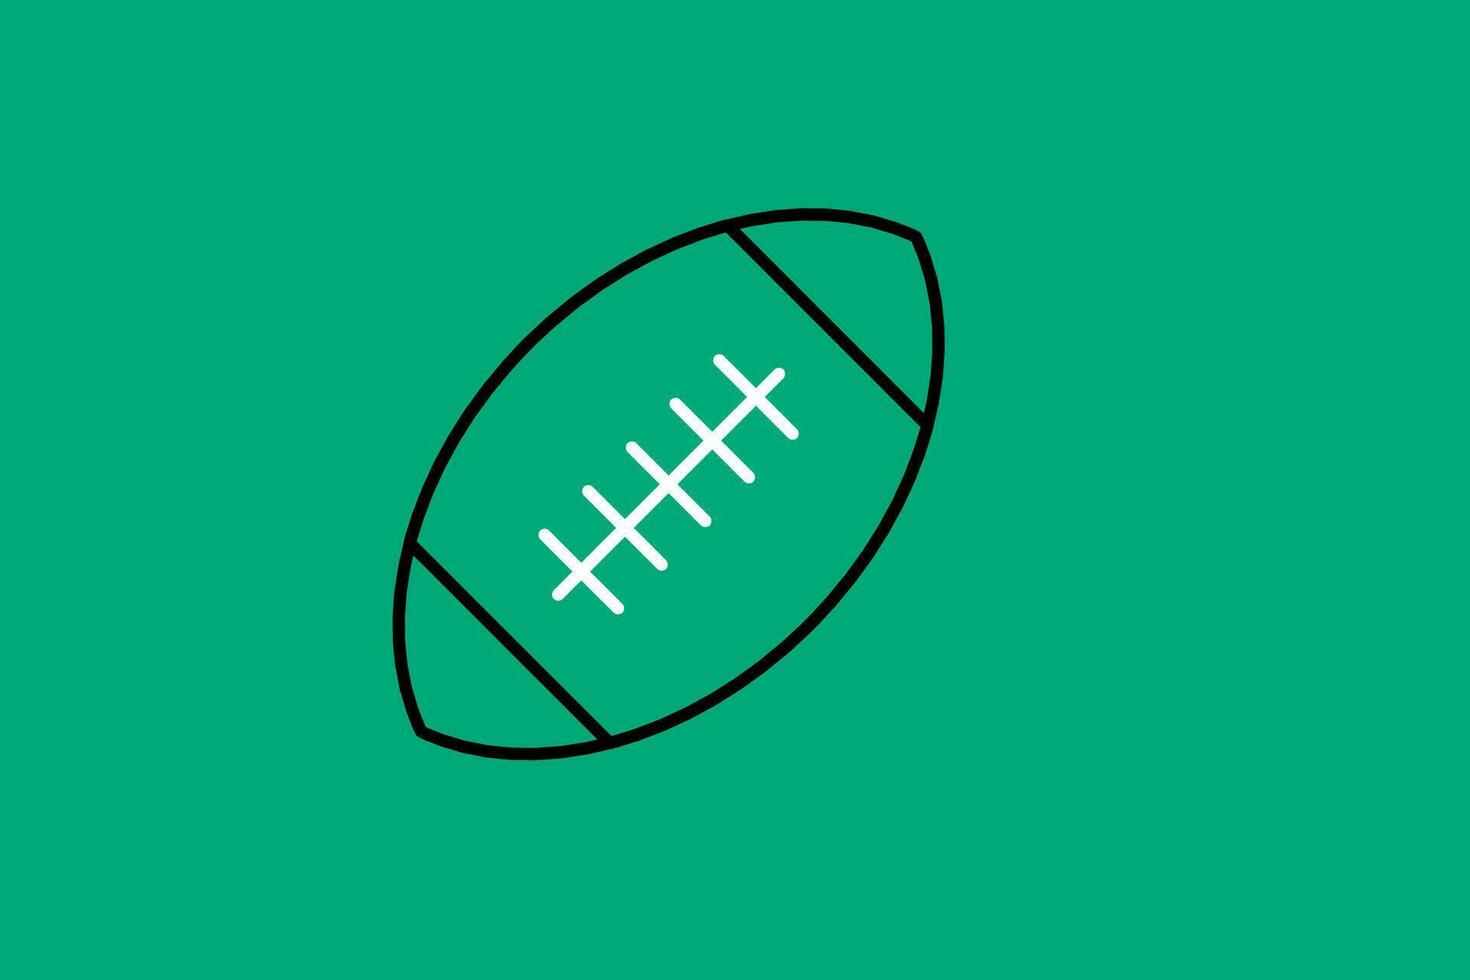 American football ball line icon on green background. Flat style vector illustration.